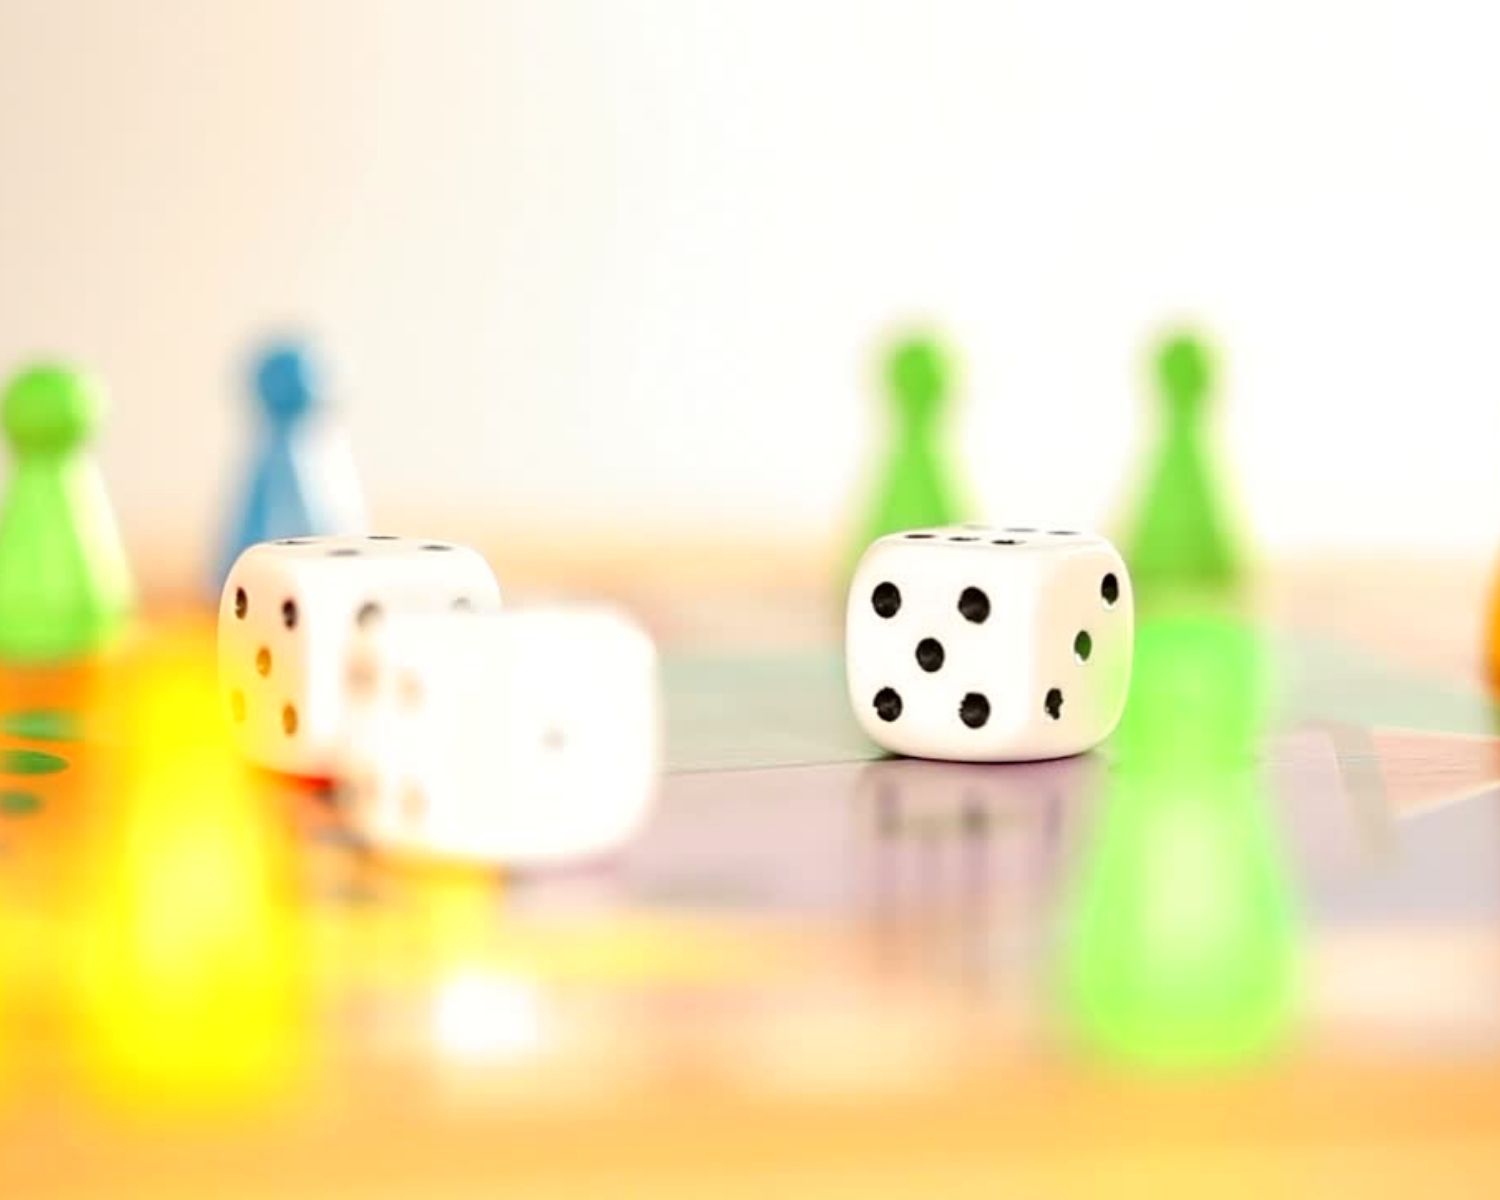 A board game with three dice and game board pieces on top